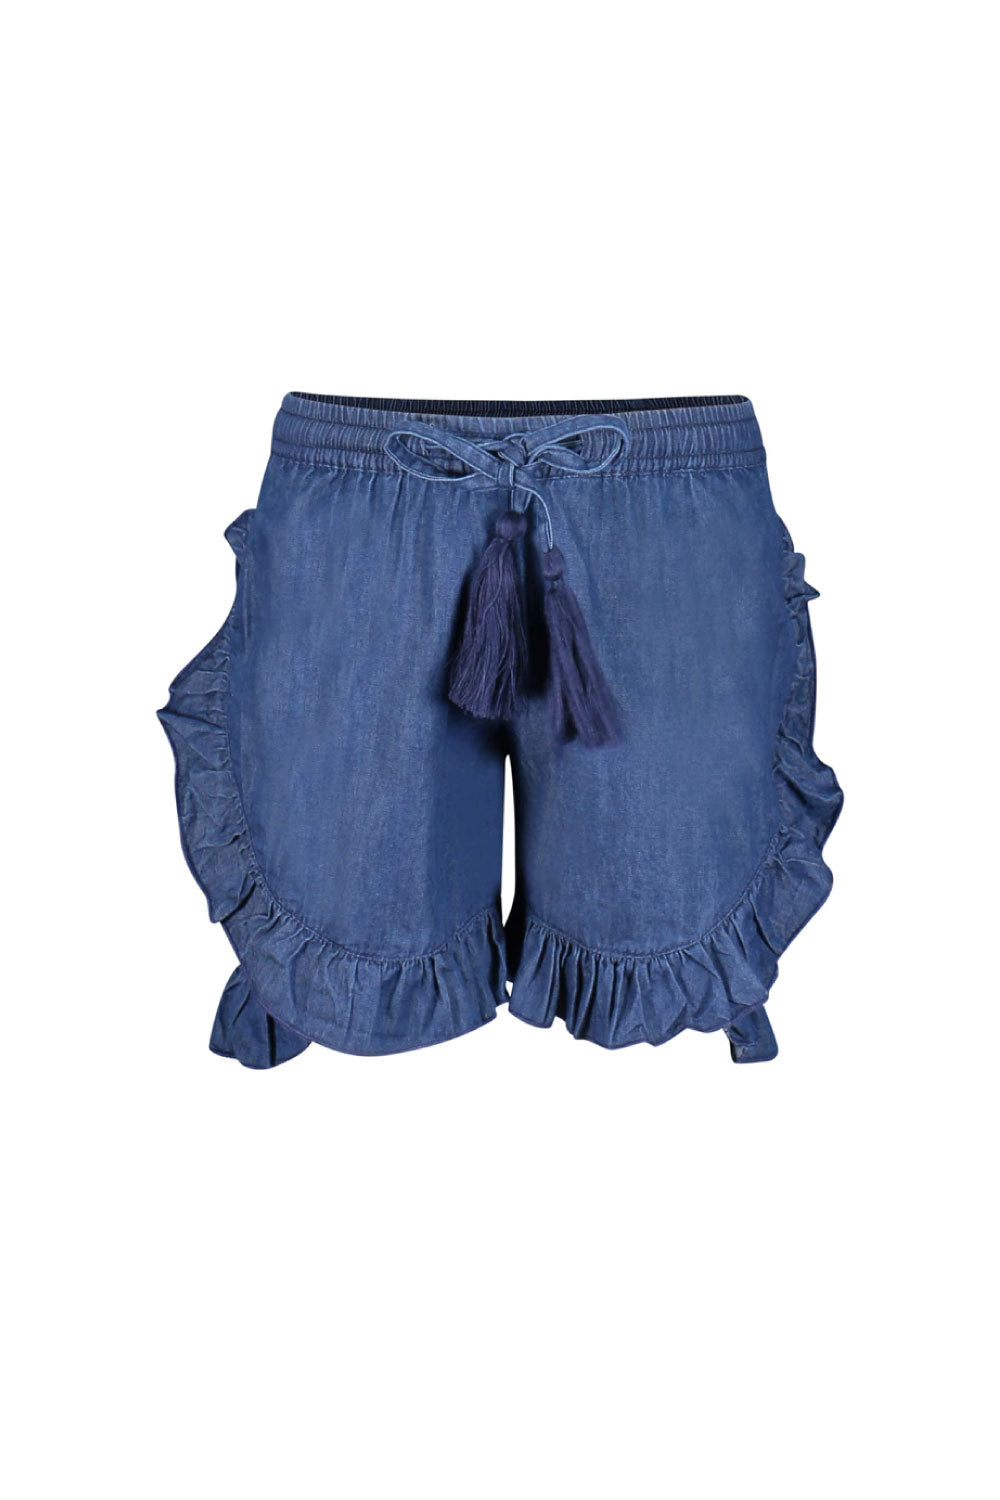 Image of the front of the Larissa Shorts in Denim.